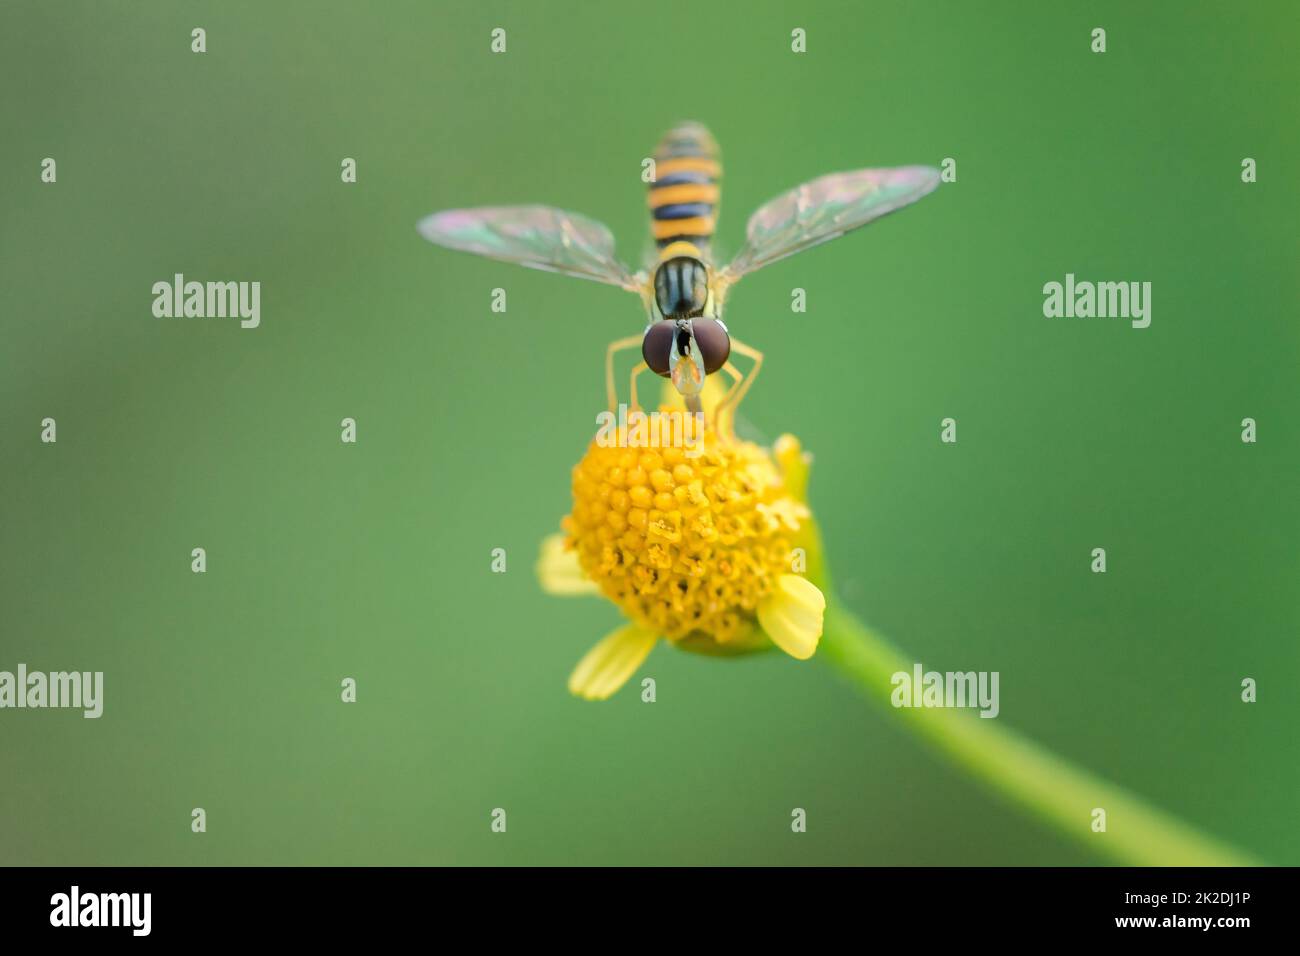 The bee is on the yellow flower pollen, is a macro photography. Stock Photo